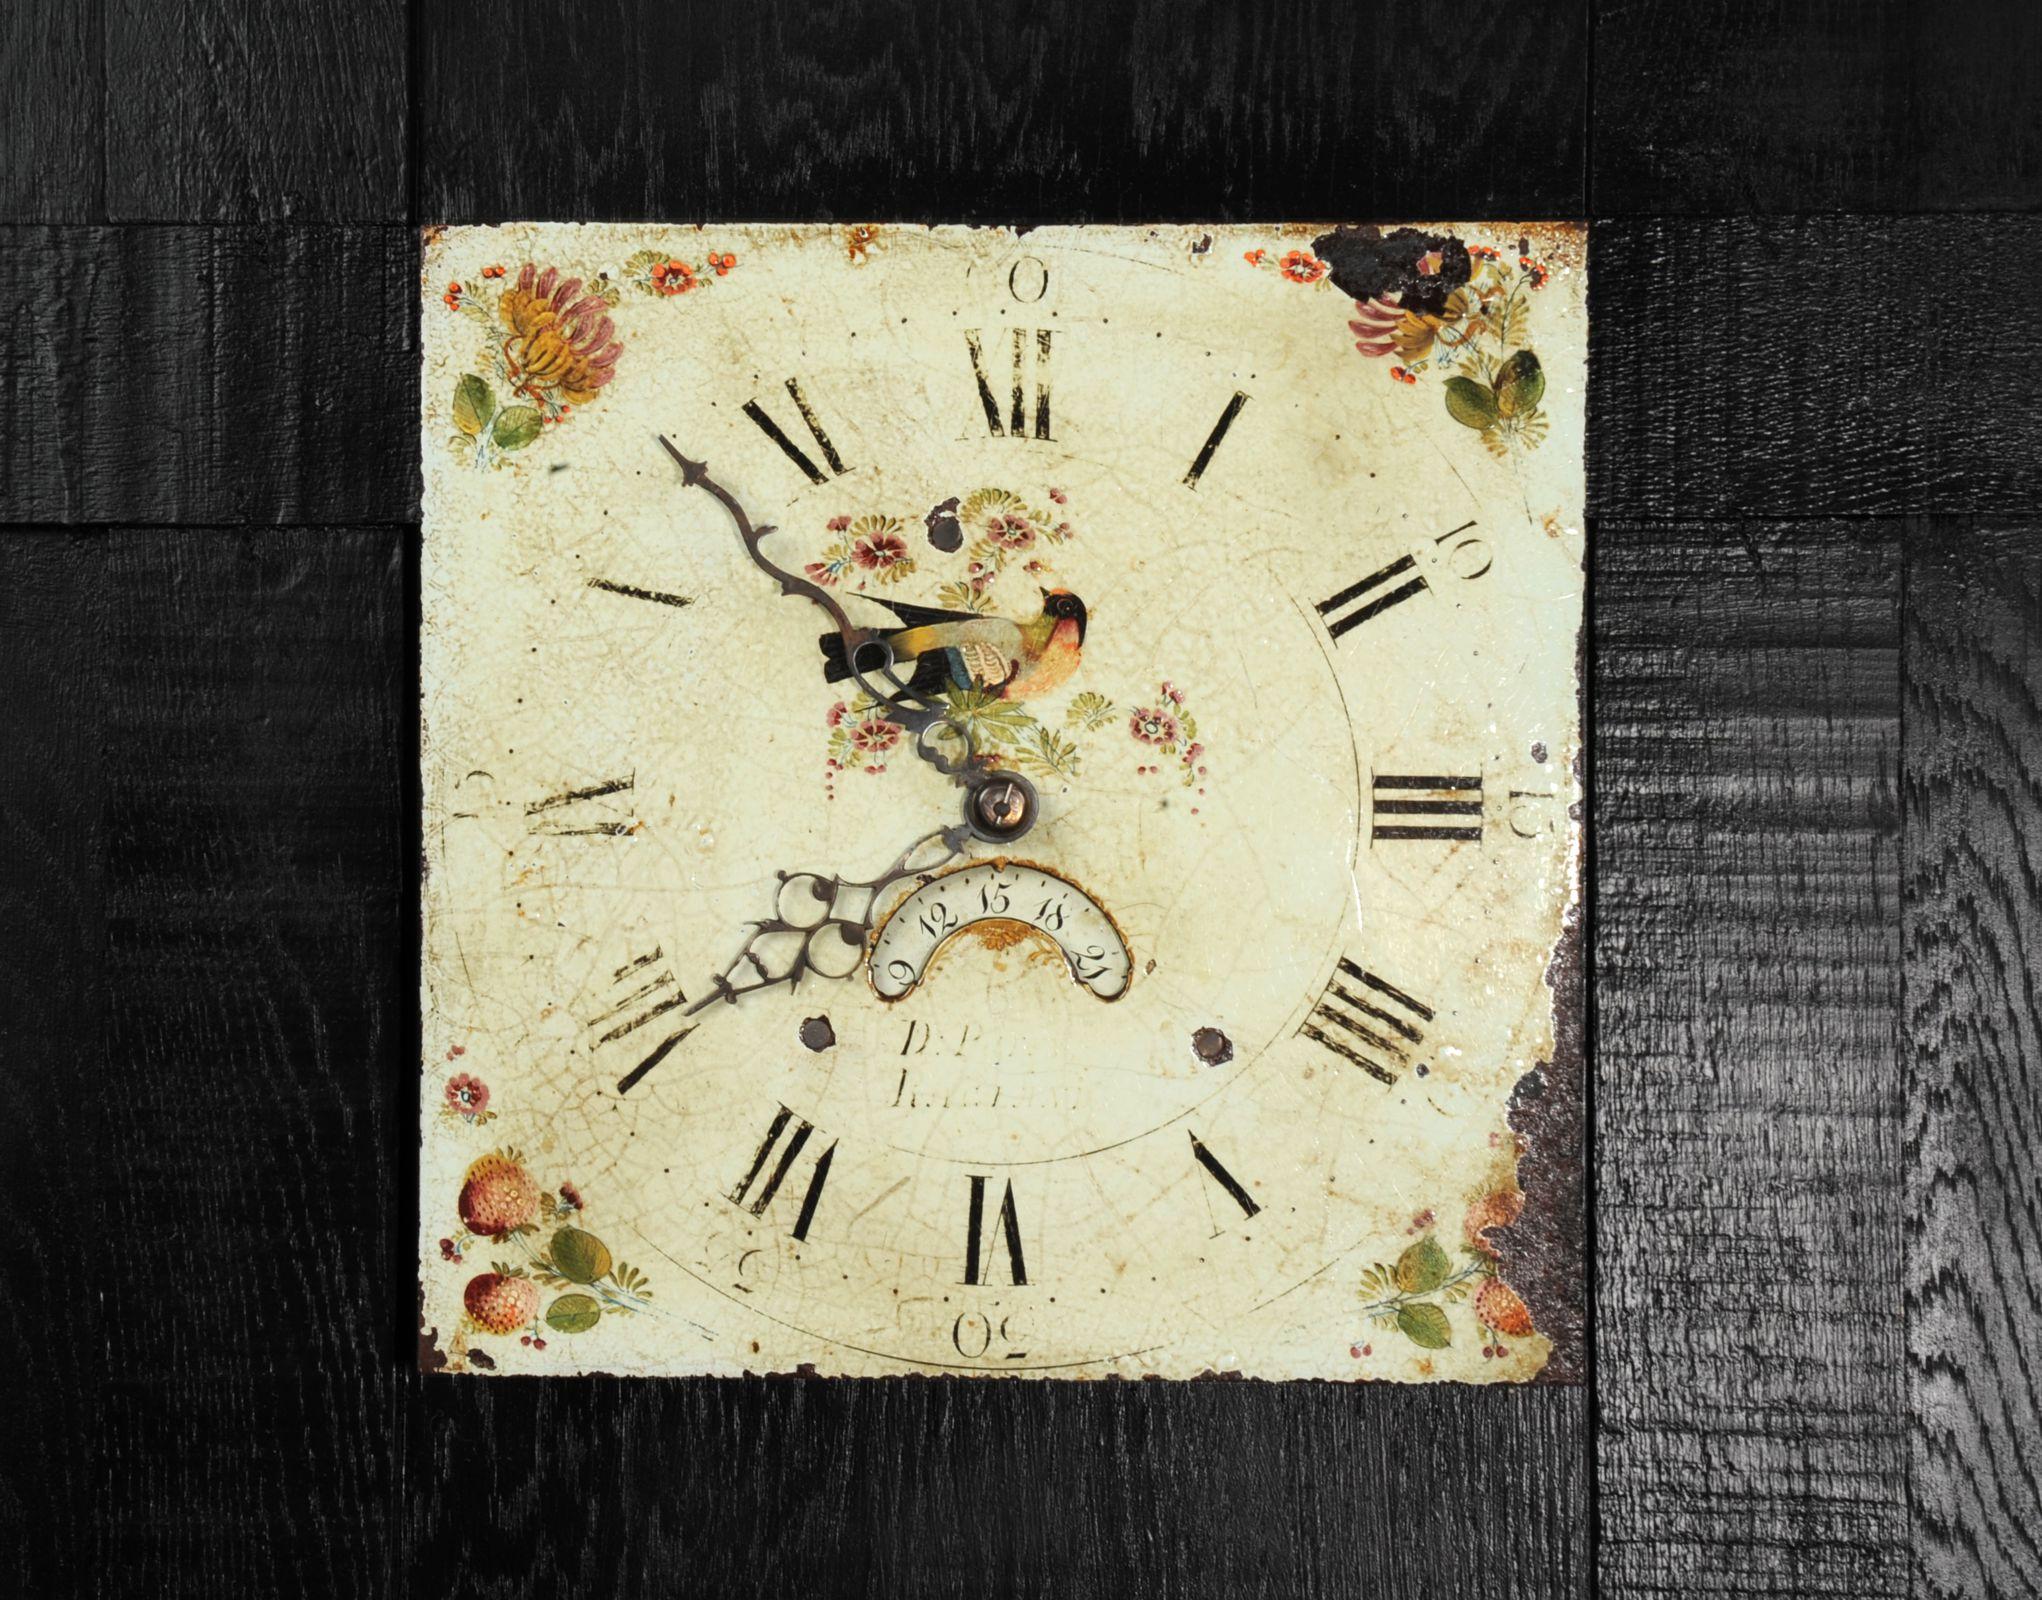 A lovely antique iron clock dial circa 1830 in its original enamel, charmingly decorated with birds and flowers. To the corners are charmingly painted flowers and summer fruits. With ancient craquelure,  rusty patches, marks of a long life and its